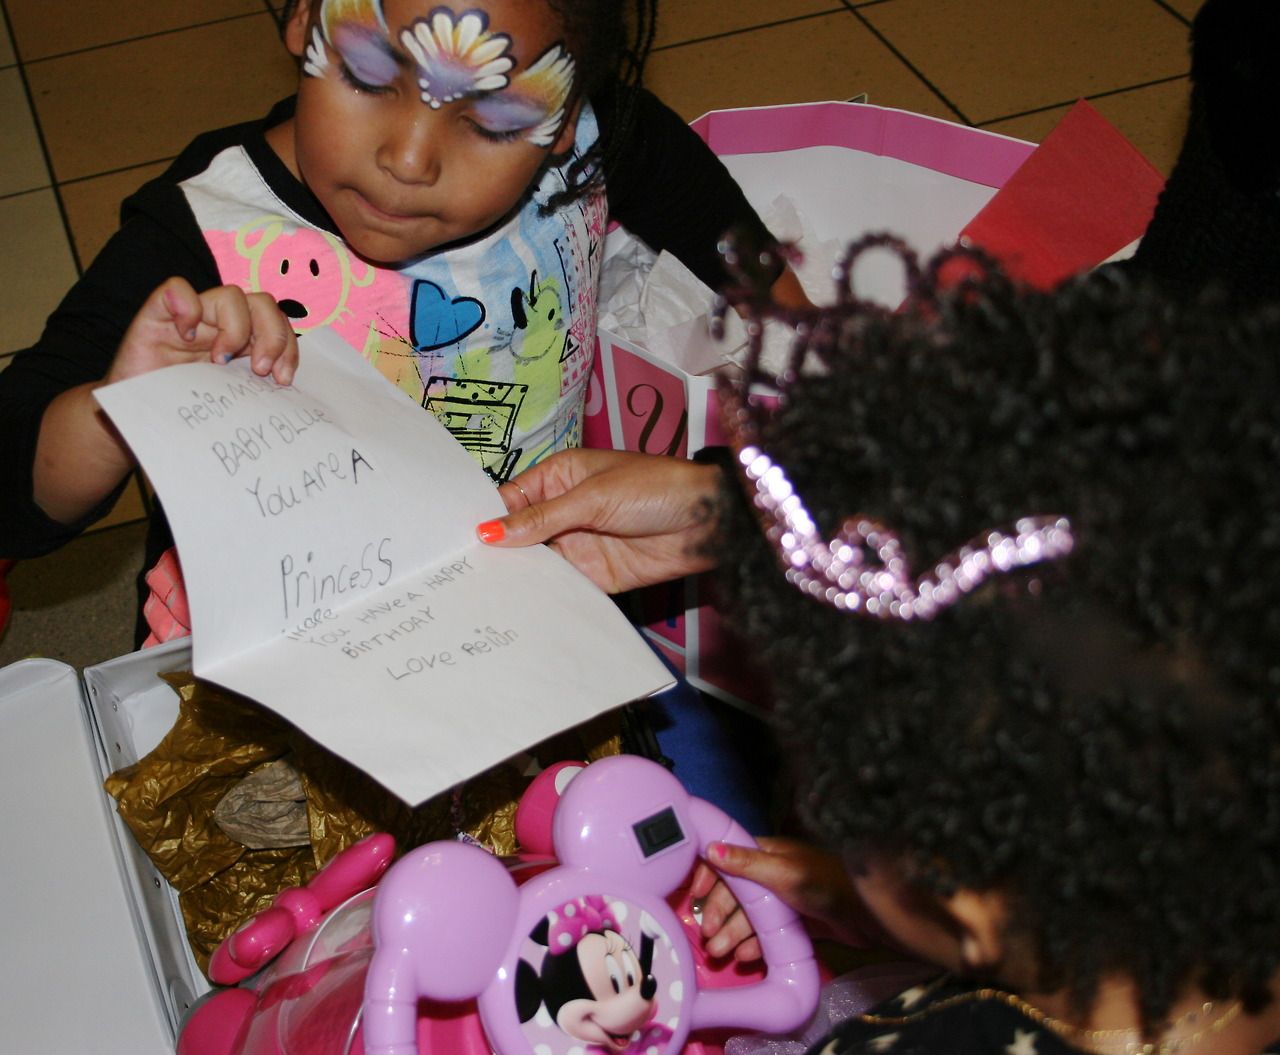 http://www.gossipcop.com/blue-ivy-second-birthday-party-photos-beyonce-new-years-eve-pics-tumblr-pictures/#0